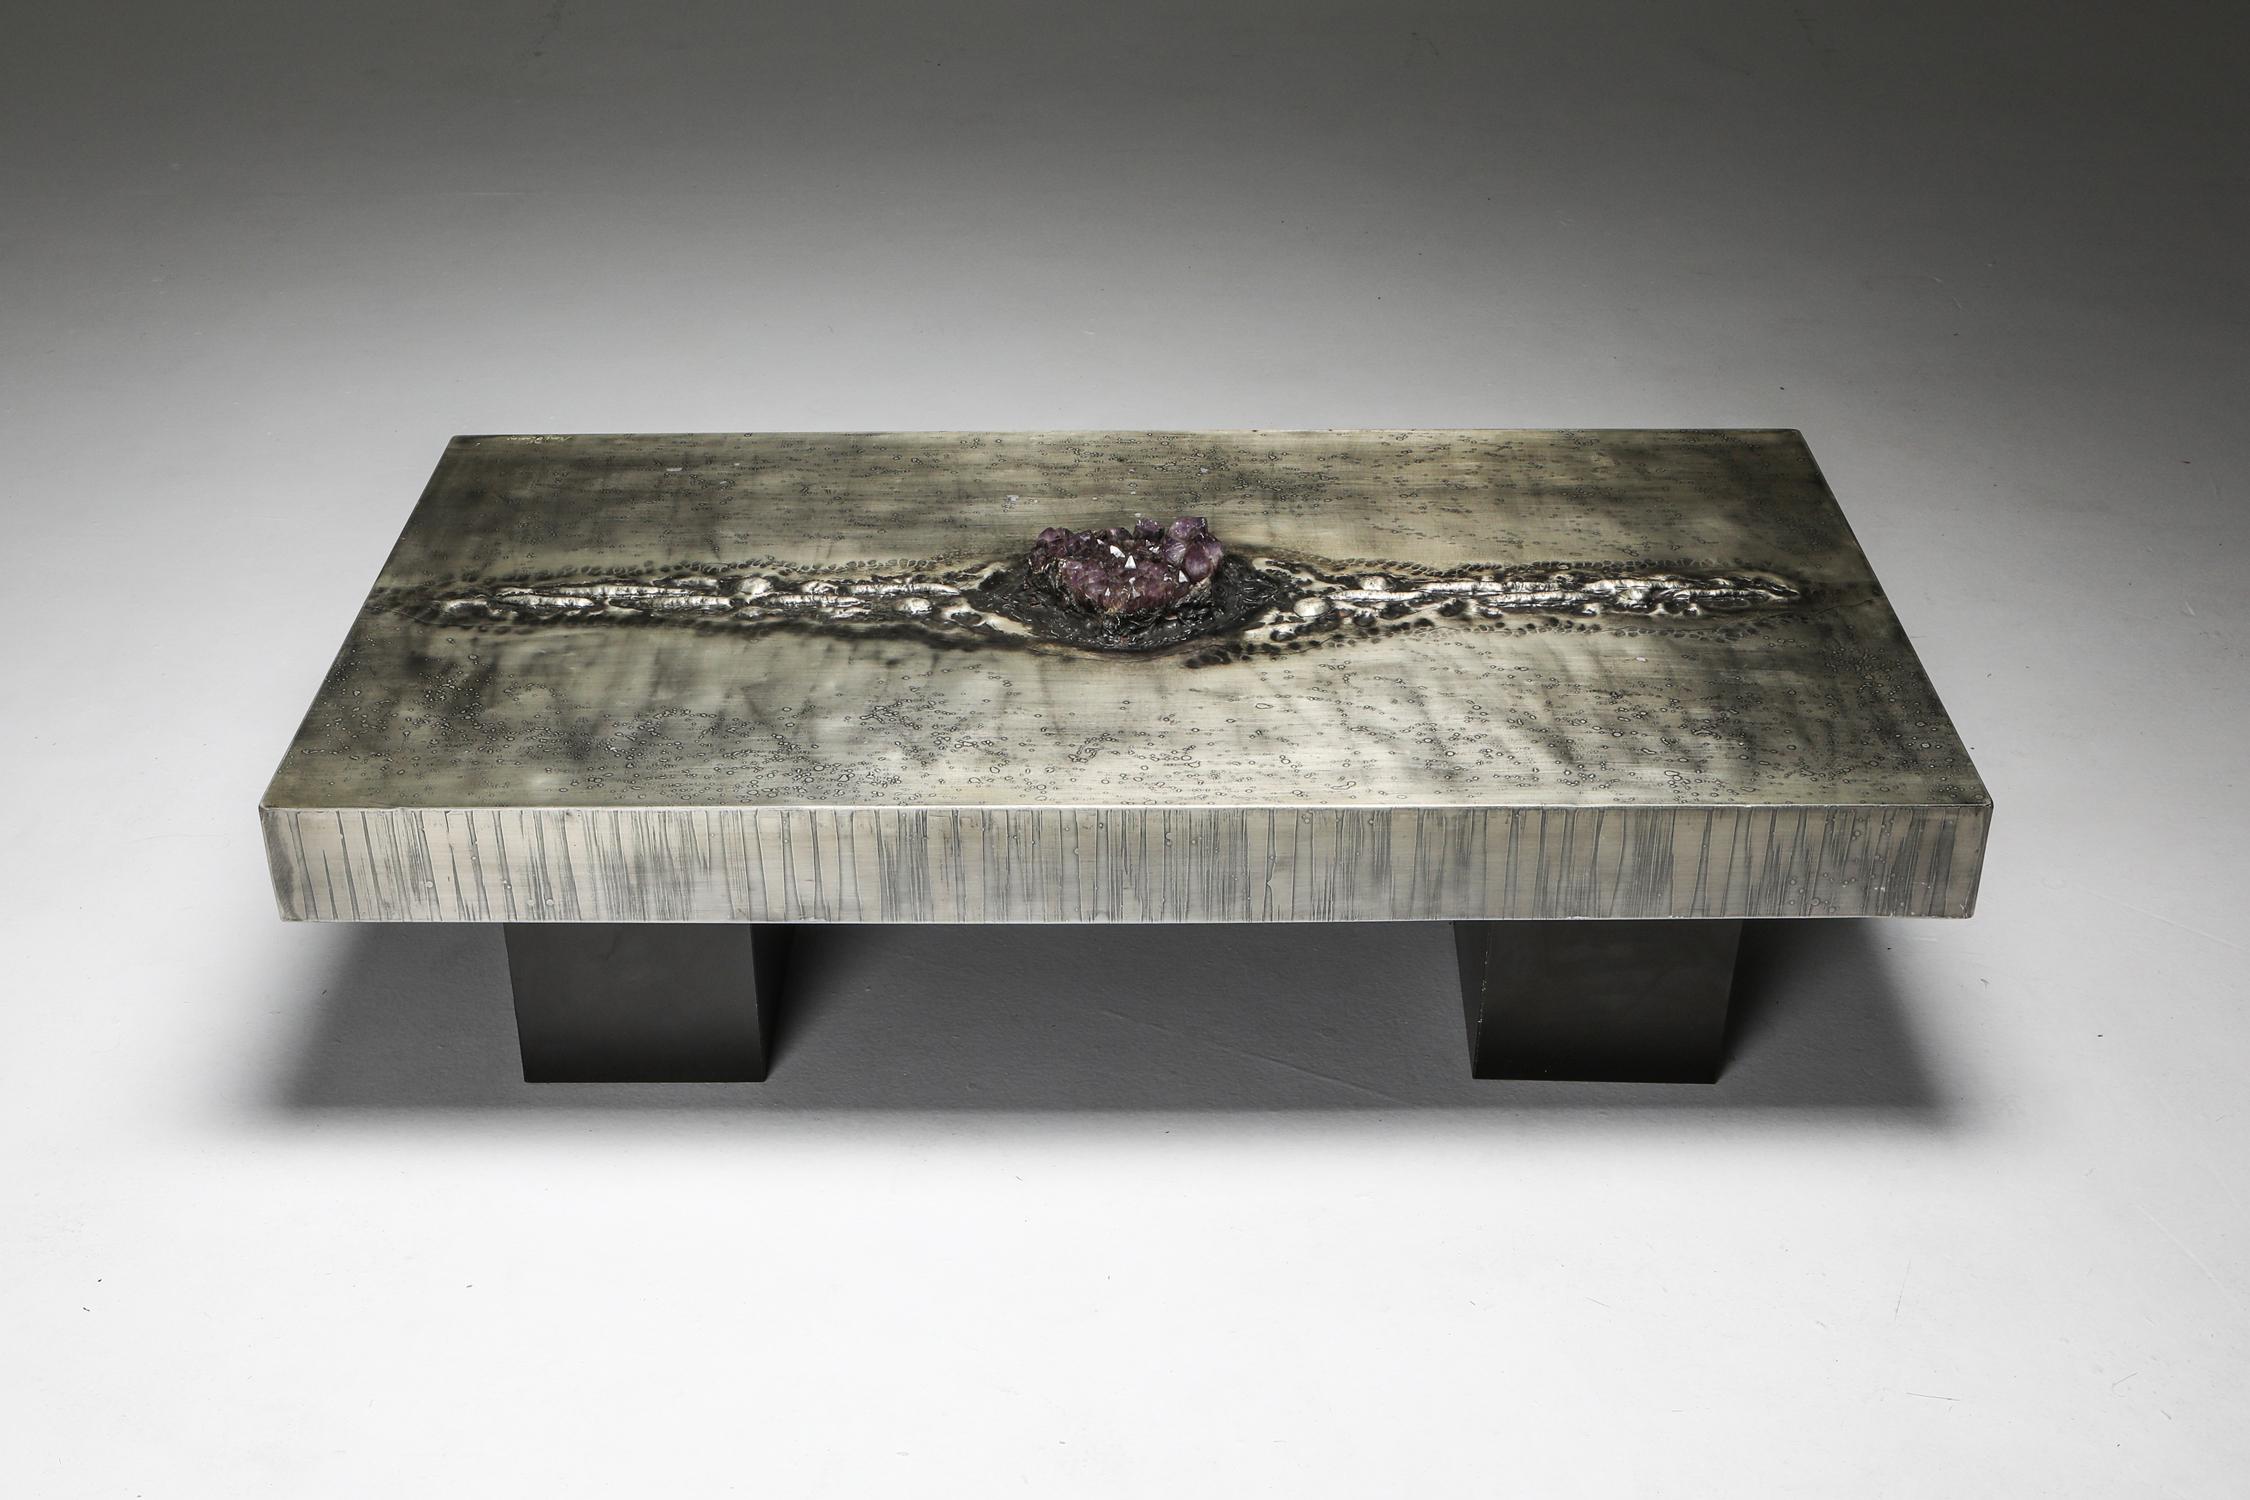 Hollywood Regency Aluminum Etched Coffee Table with Amethyst Inlay by Marc D'Haenens